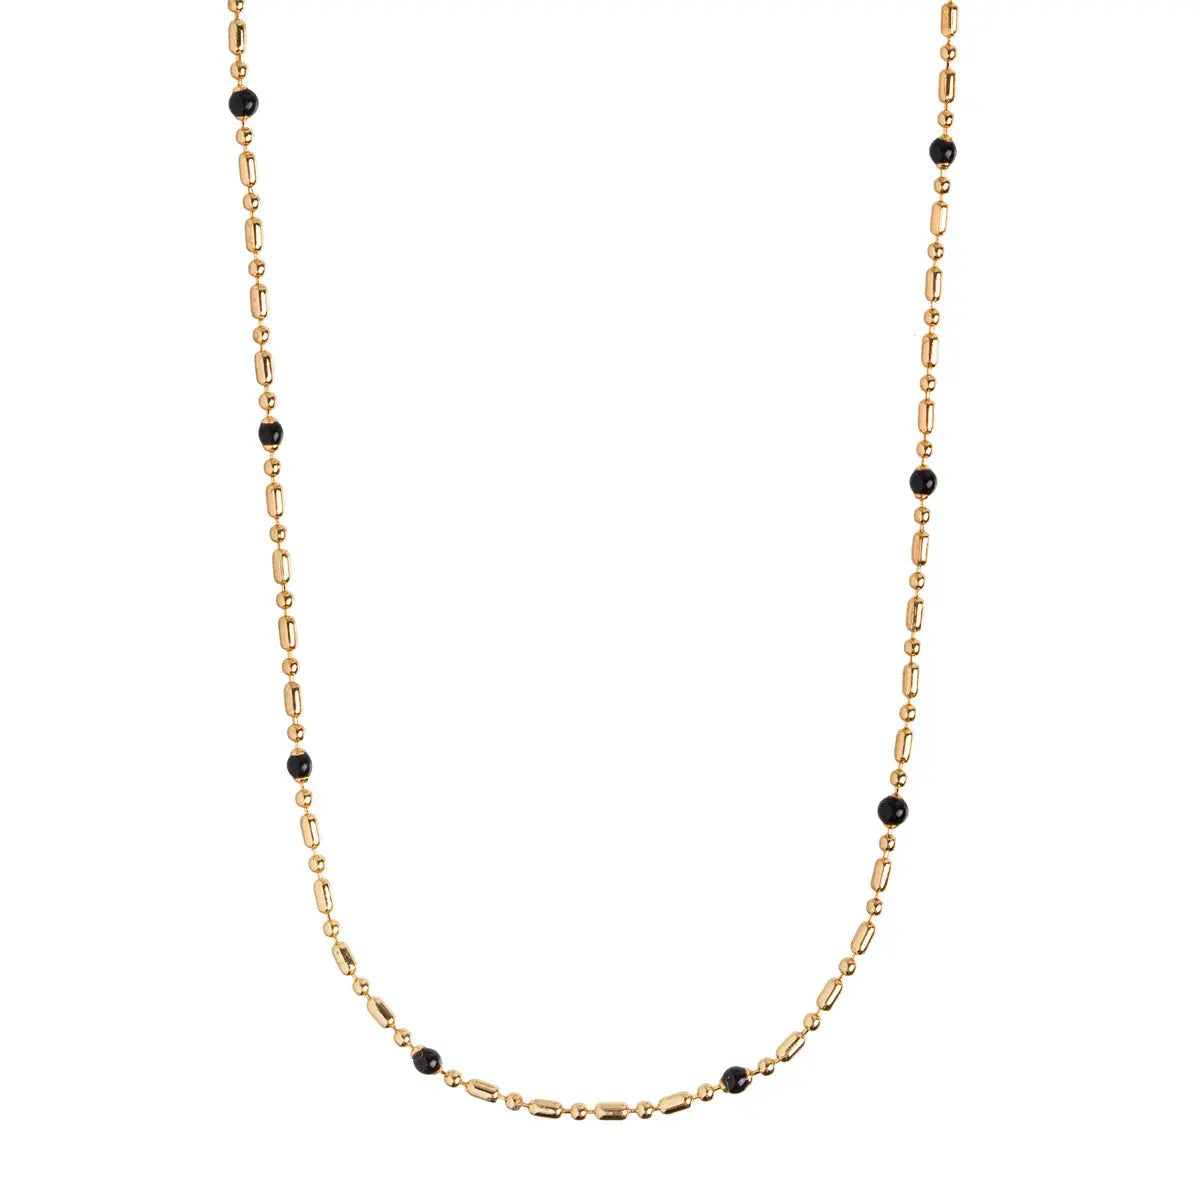 Bead Necklace Minimalistic - Gold and Black